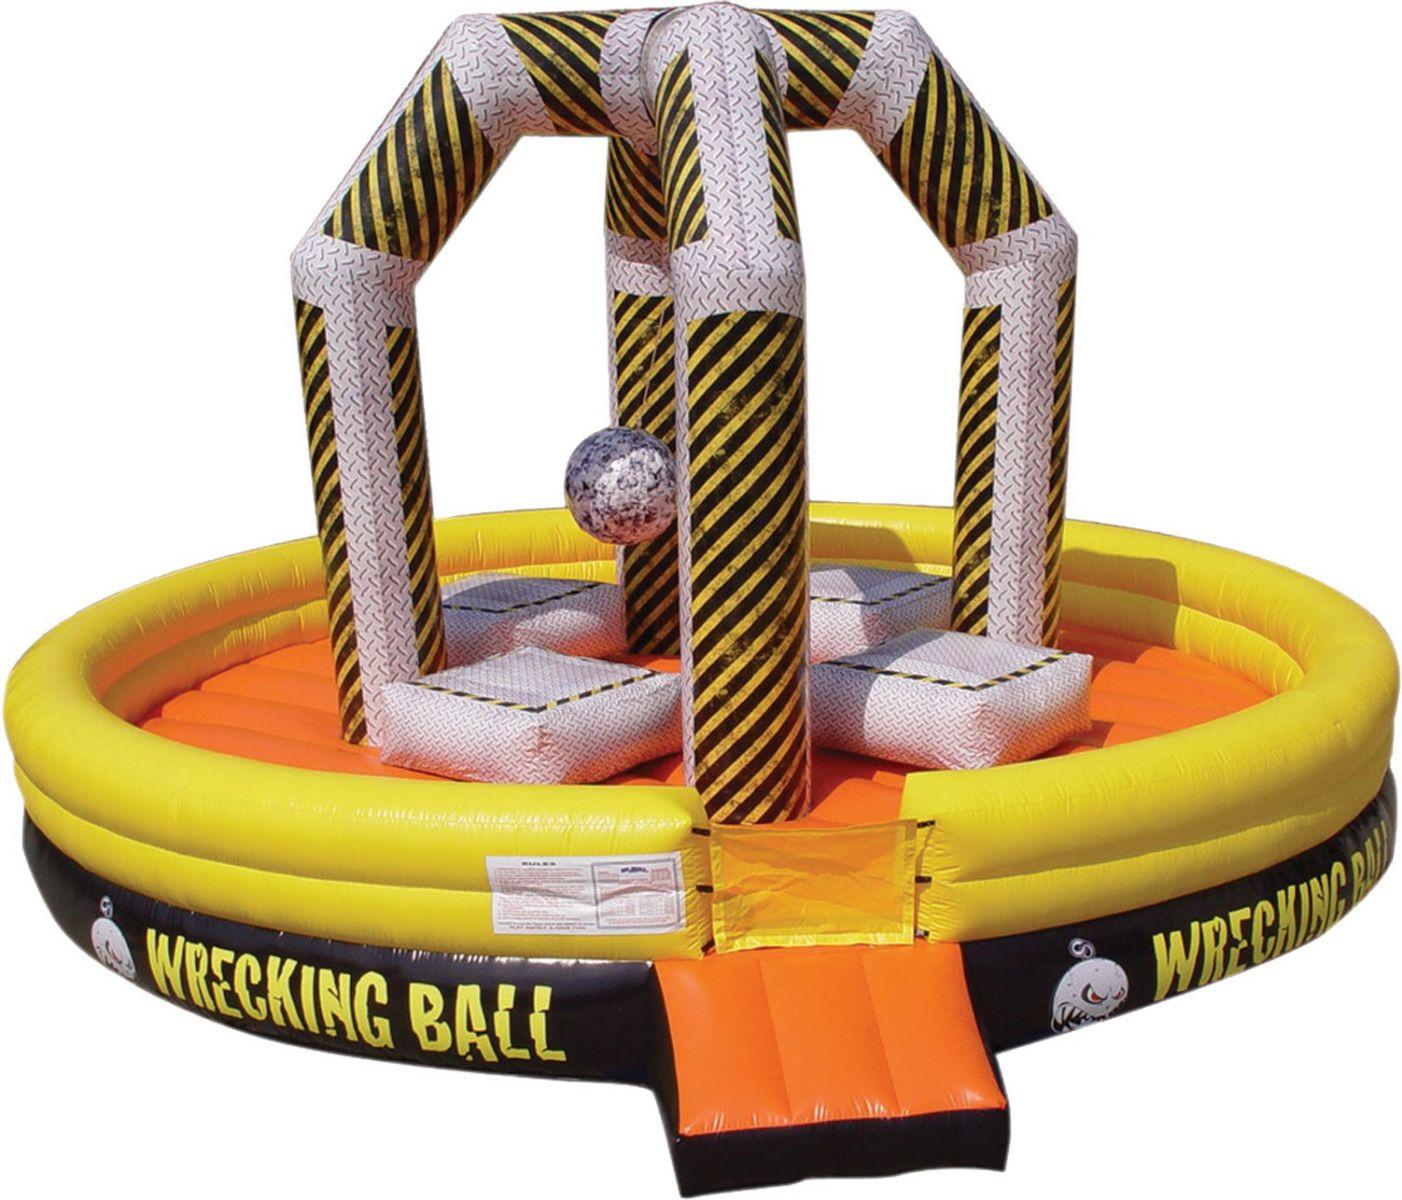 Wrecking Ball Inflatable Game Rental Chicago, Chicago Human Wrecking Ball Rental in IL